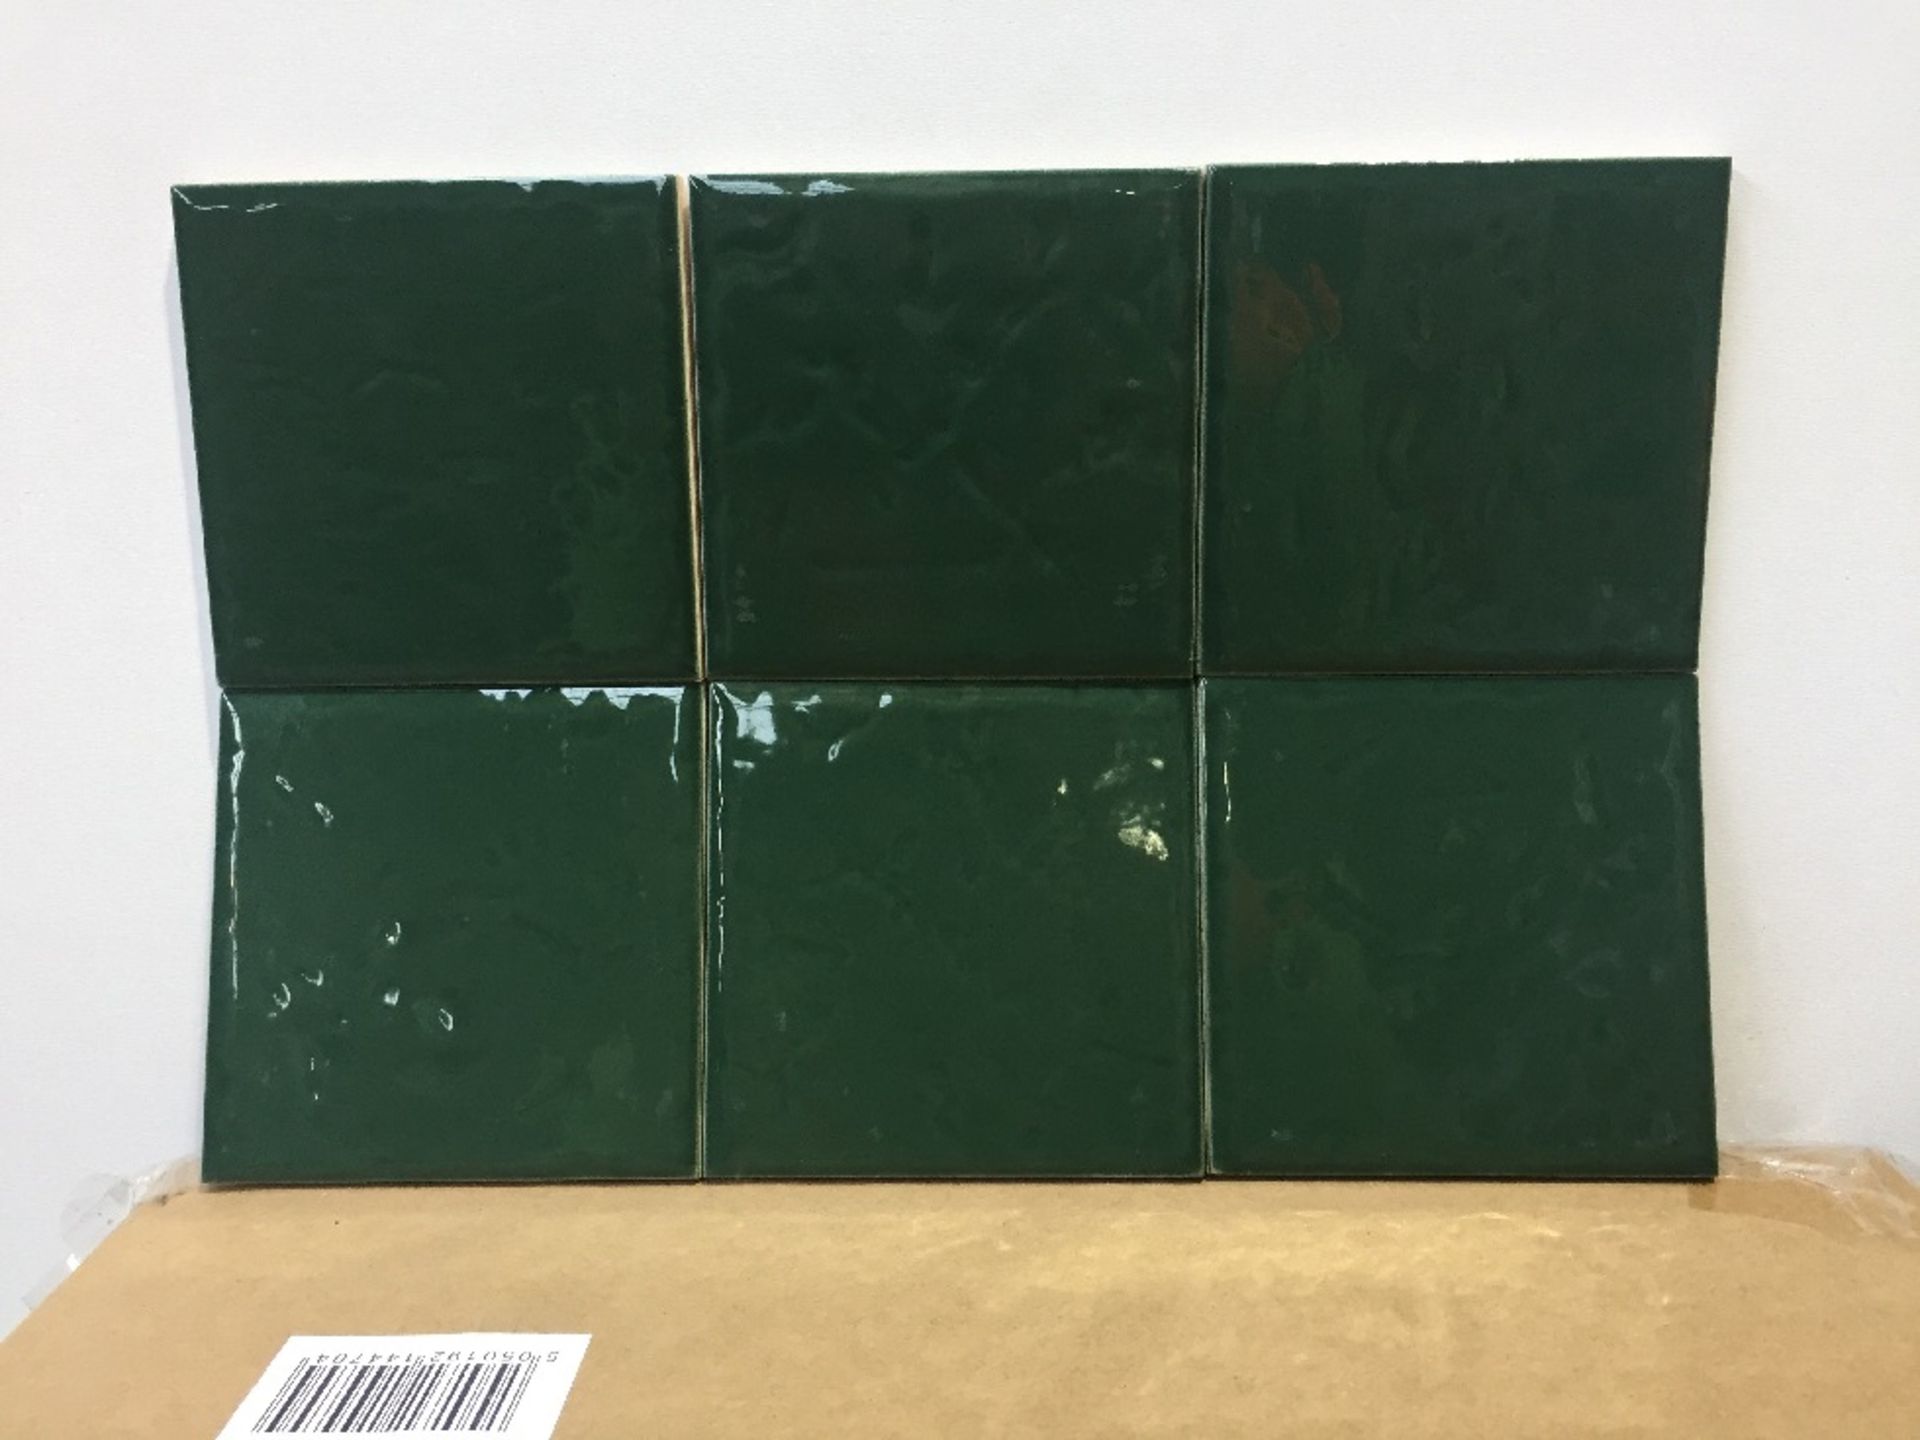 4 BRAND NEW BOXES OF JOHNSONS BATHROOM TILES IN CO